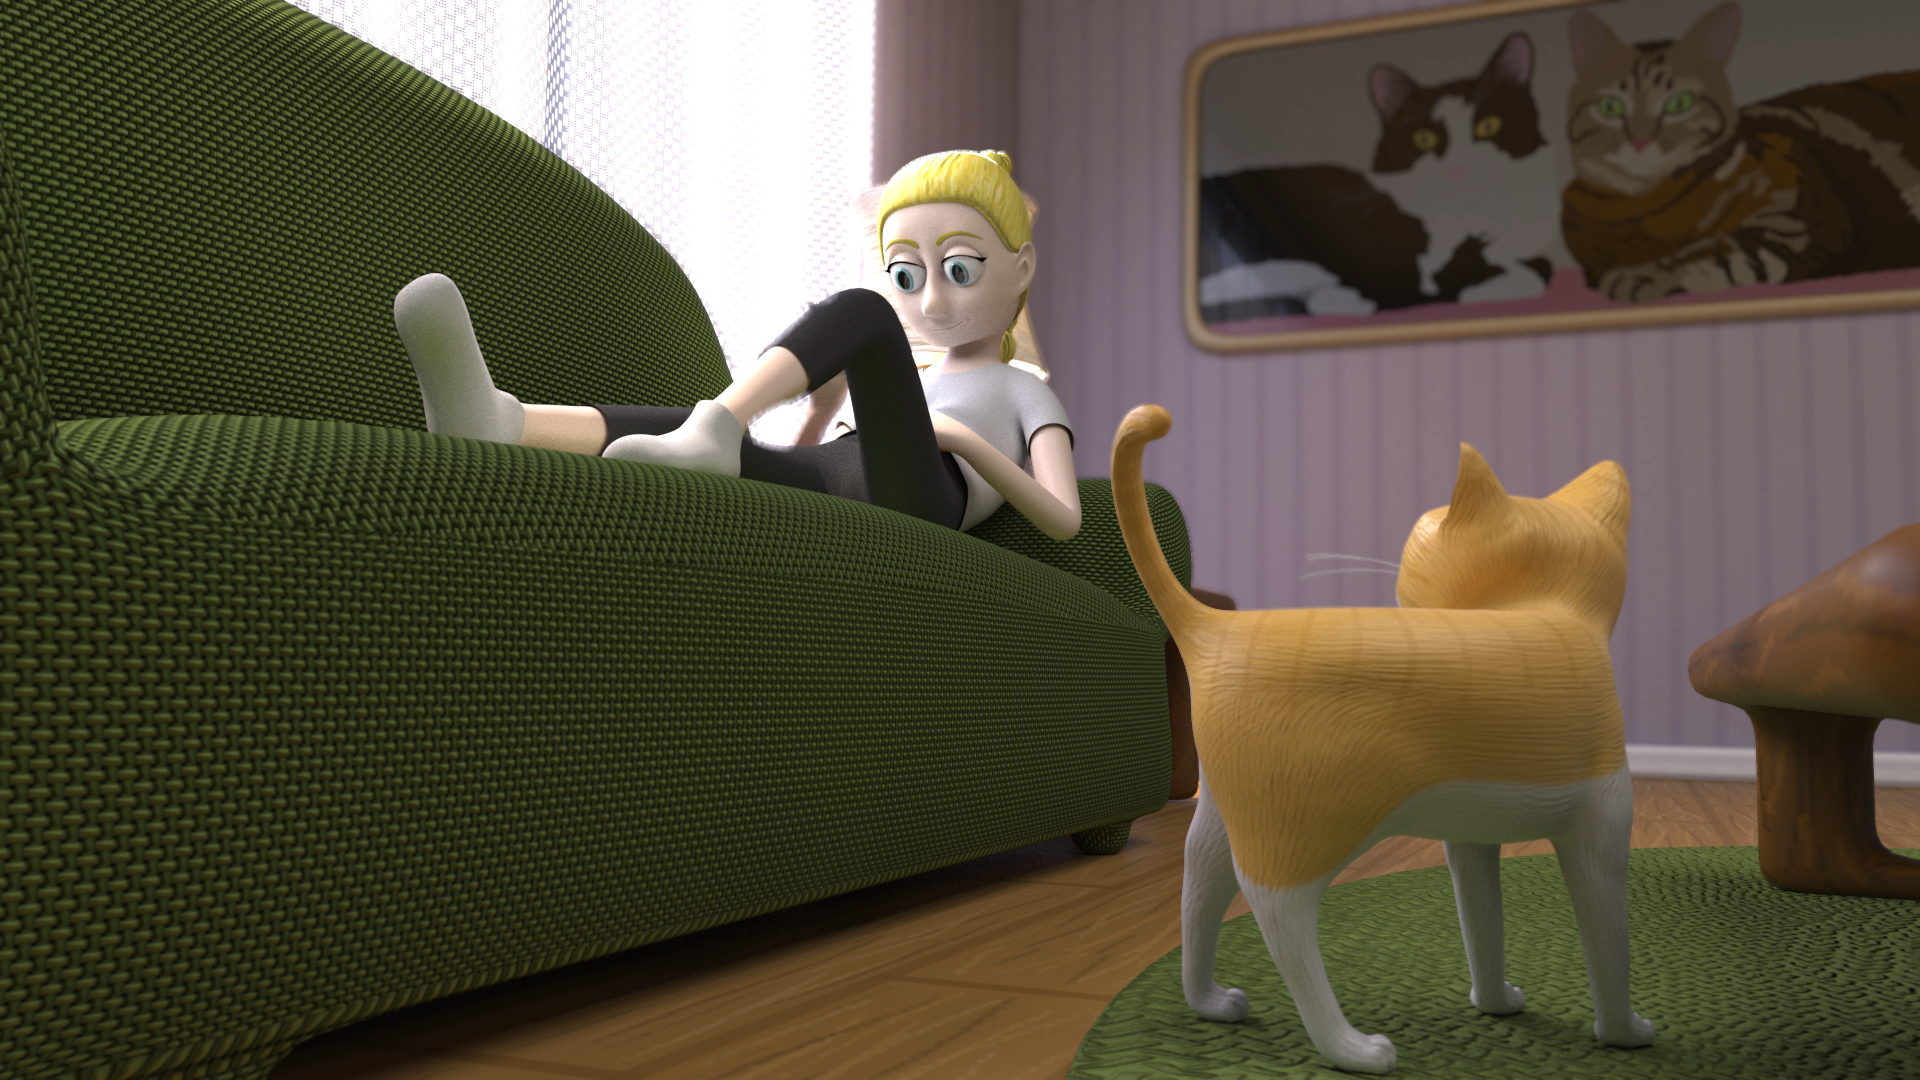 Centre-left a blonde girl lies on a green couch, staring at her phone, while in the lower-right section of the frame an orange and white cat looks up at her from the ground.